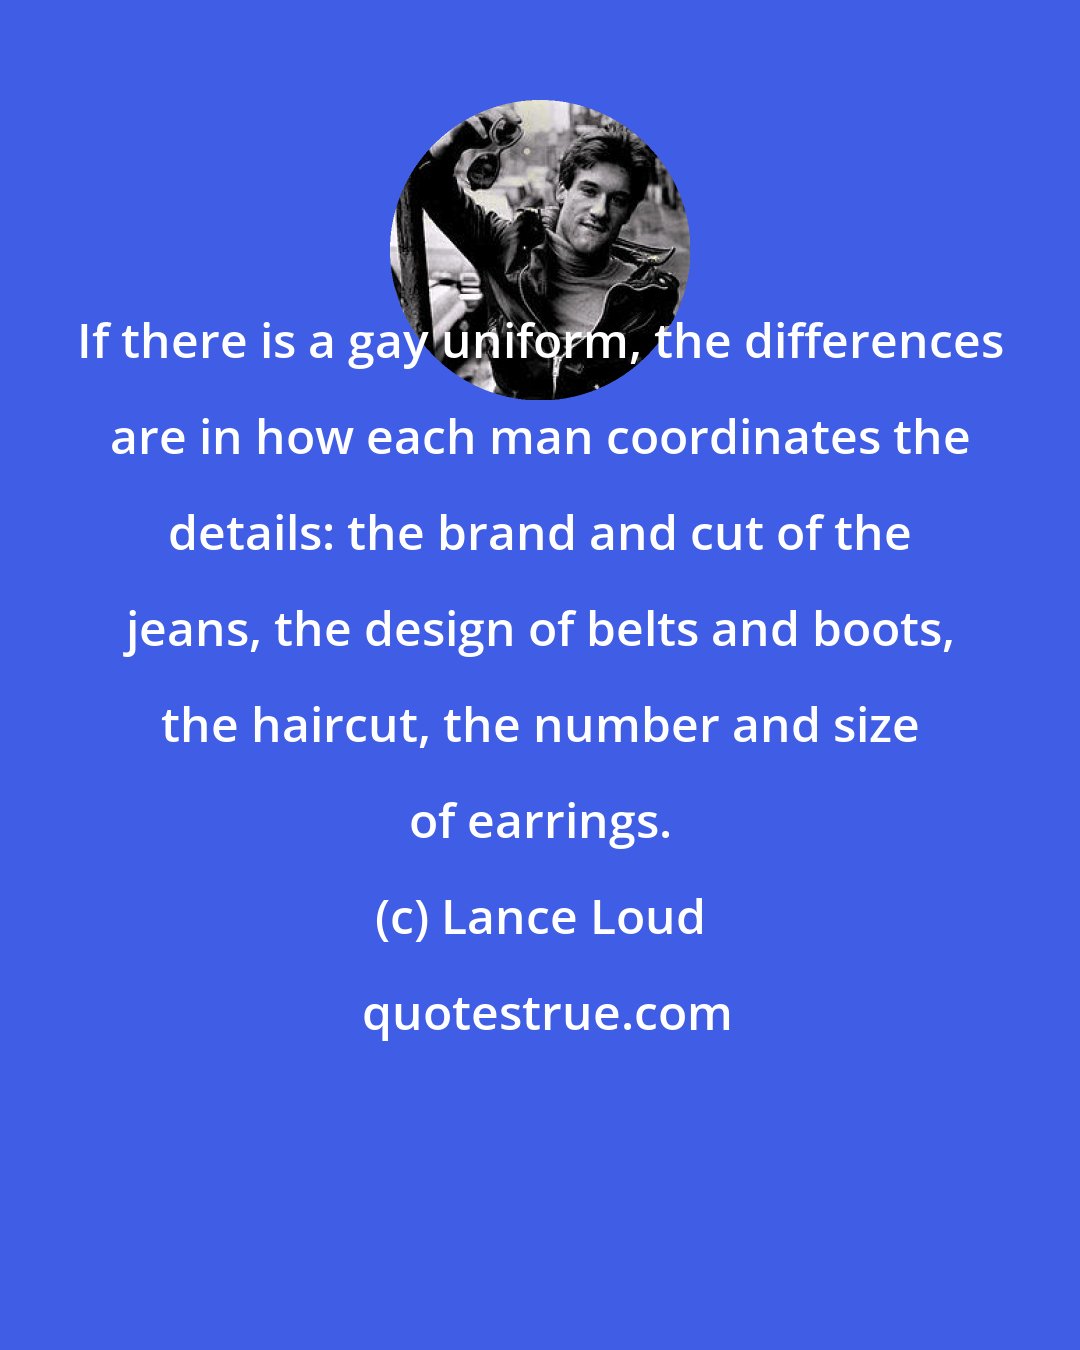 Lance Loud: If there is a gay uniform, the differences are in how each man coordinates the details: the brand and cut of the jeans, the design of belts and boots, the haircut, the number and size of earrings.